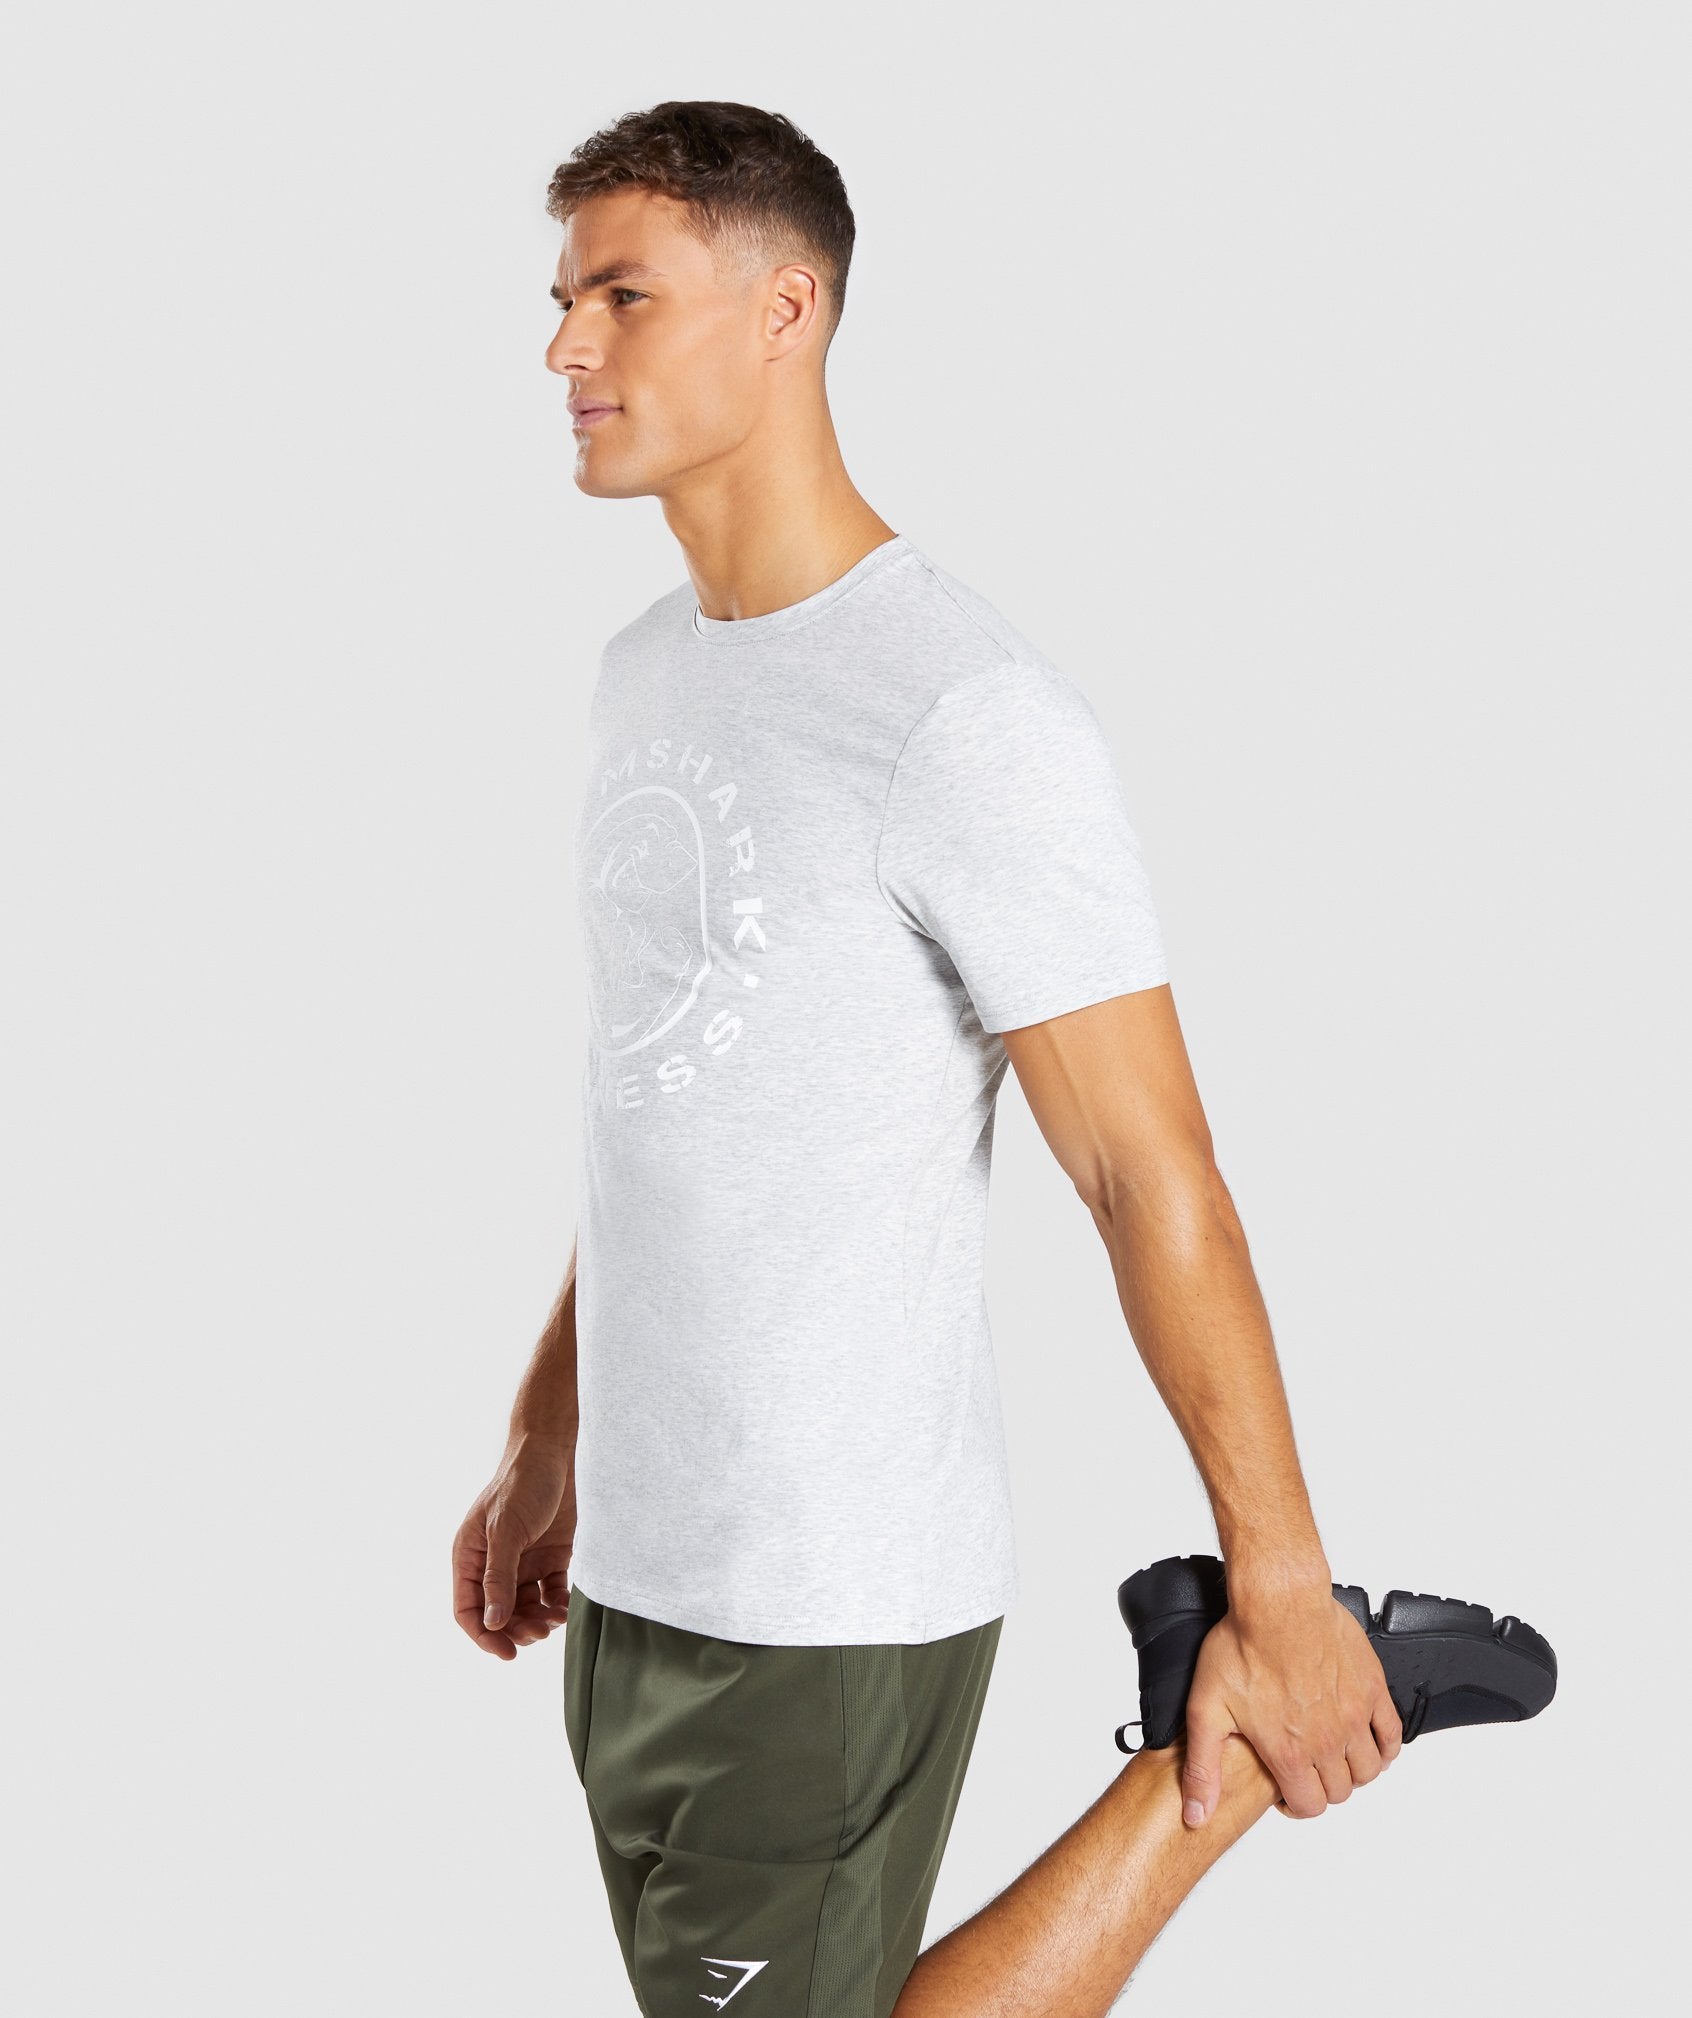 Legacy T-Shirt in Wolf Grey Marl - view 3